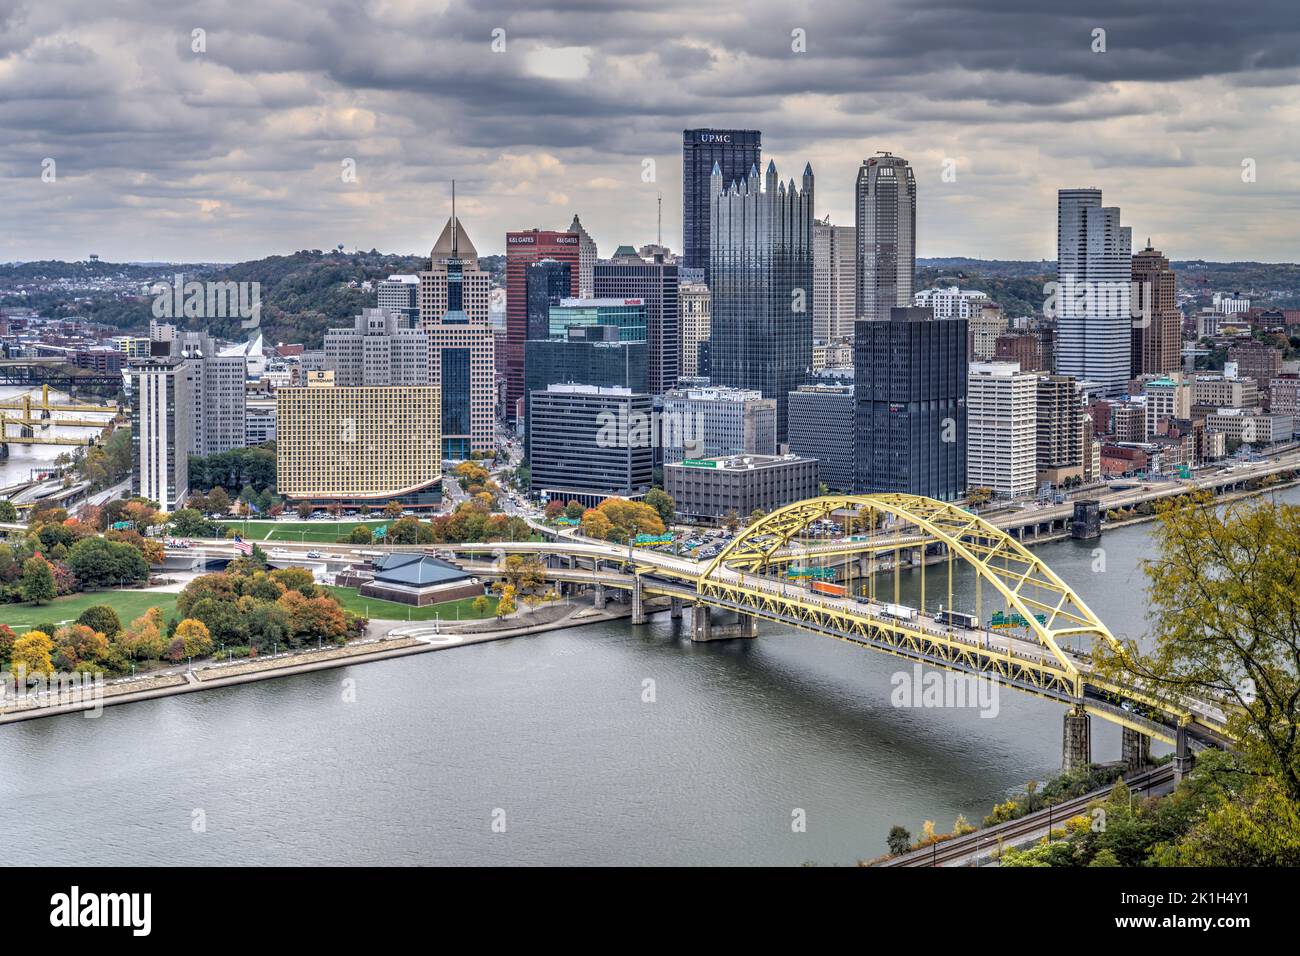 View of the Pittsburgh “Golden Triangle”  with the Fort Duquesne Bridge from the Duquesne Incline Upper Station in Pittsburgh, Pennsylvania. Stock Photo